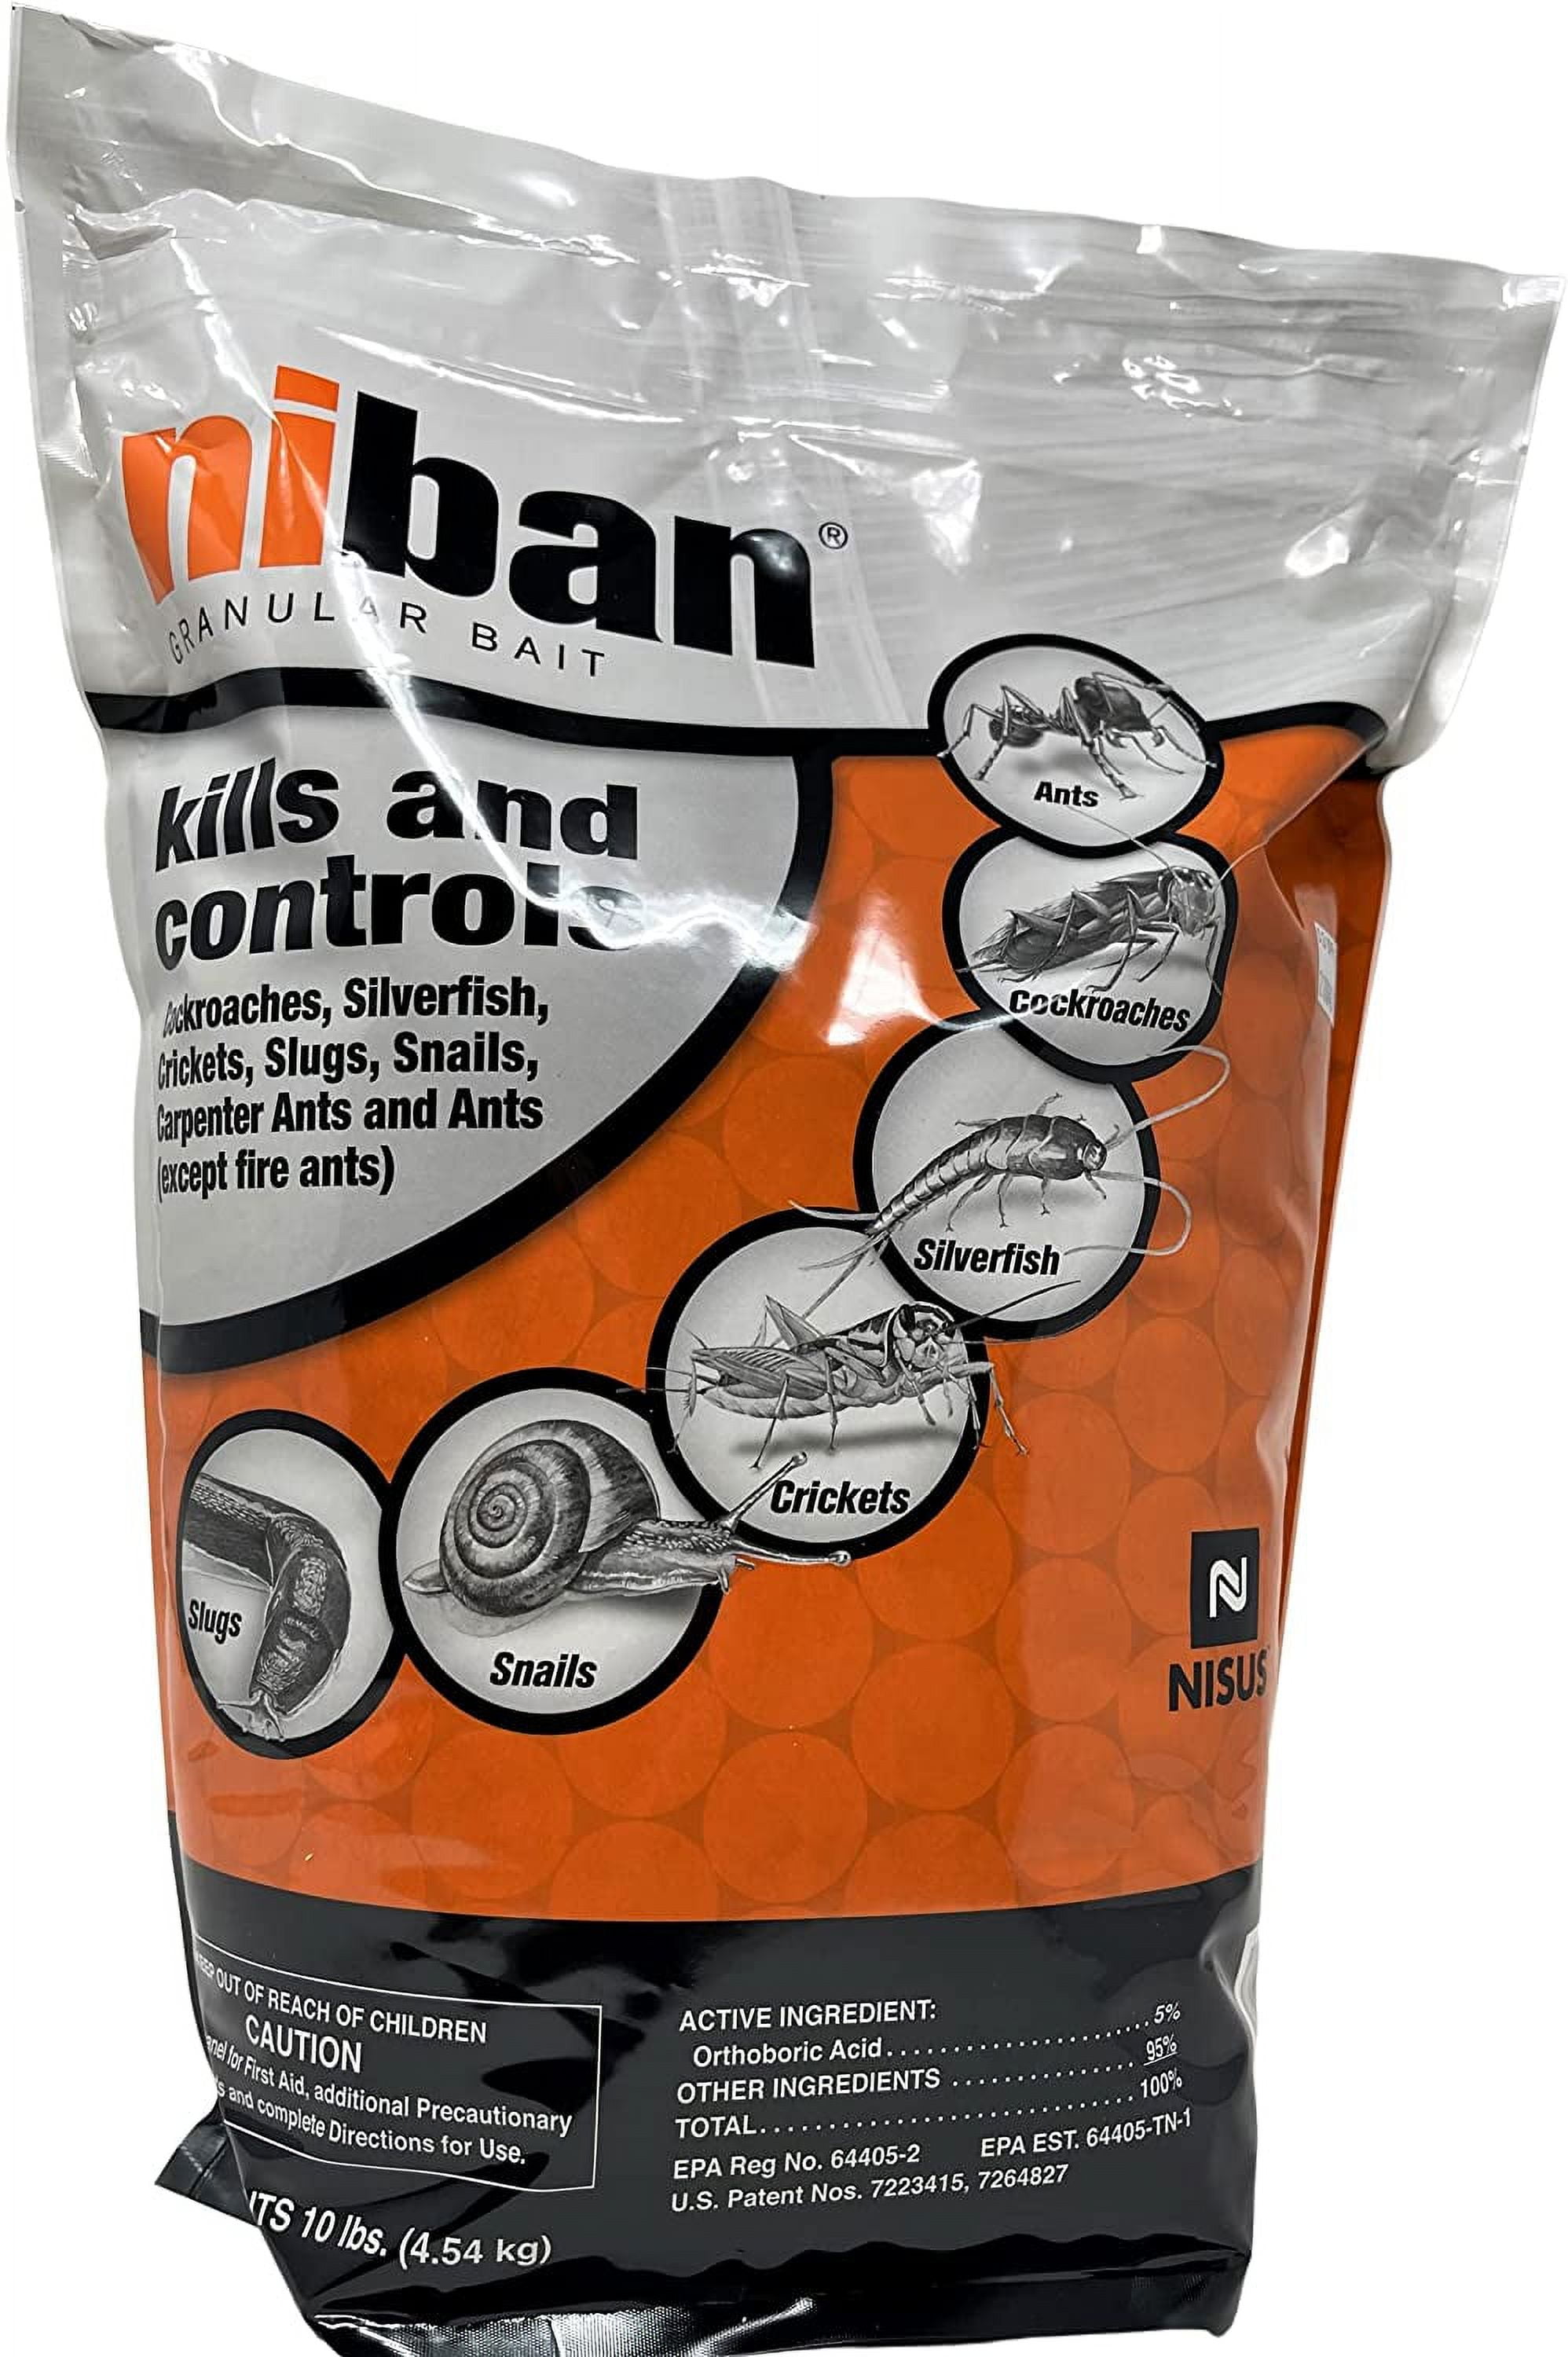 Nisus Niban Granular Insect Bait 10lb bag for Ants Cockroaches